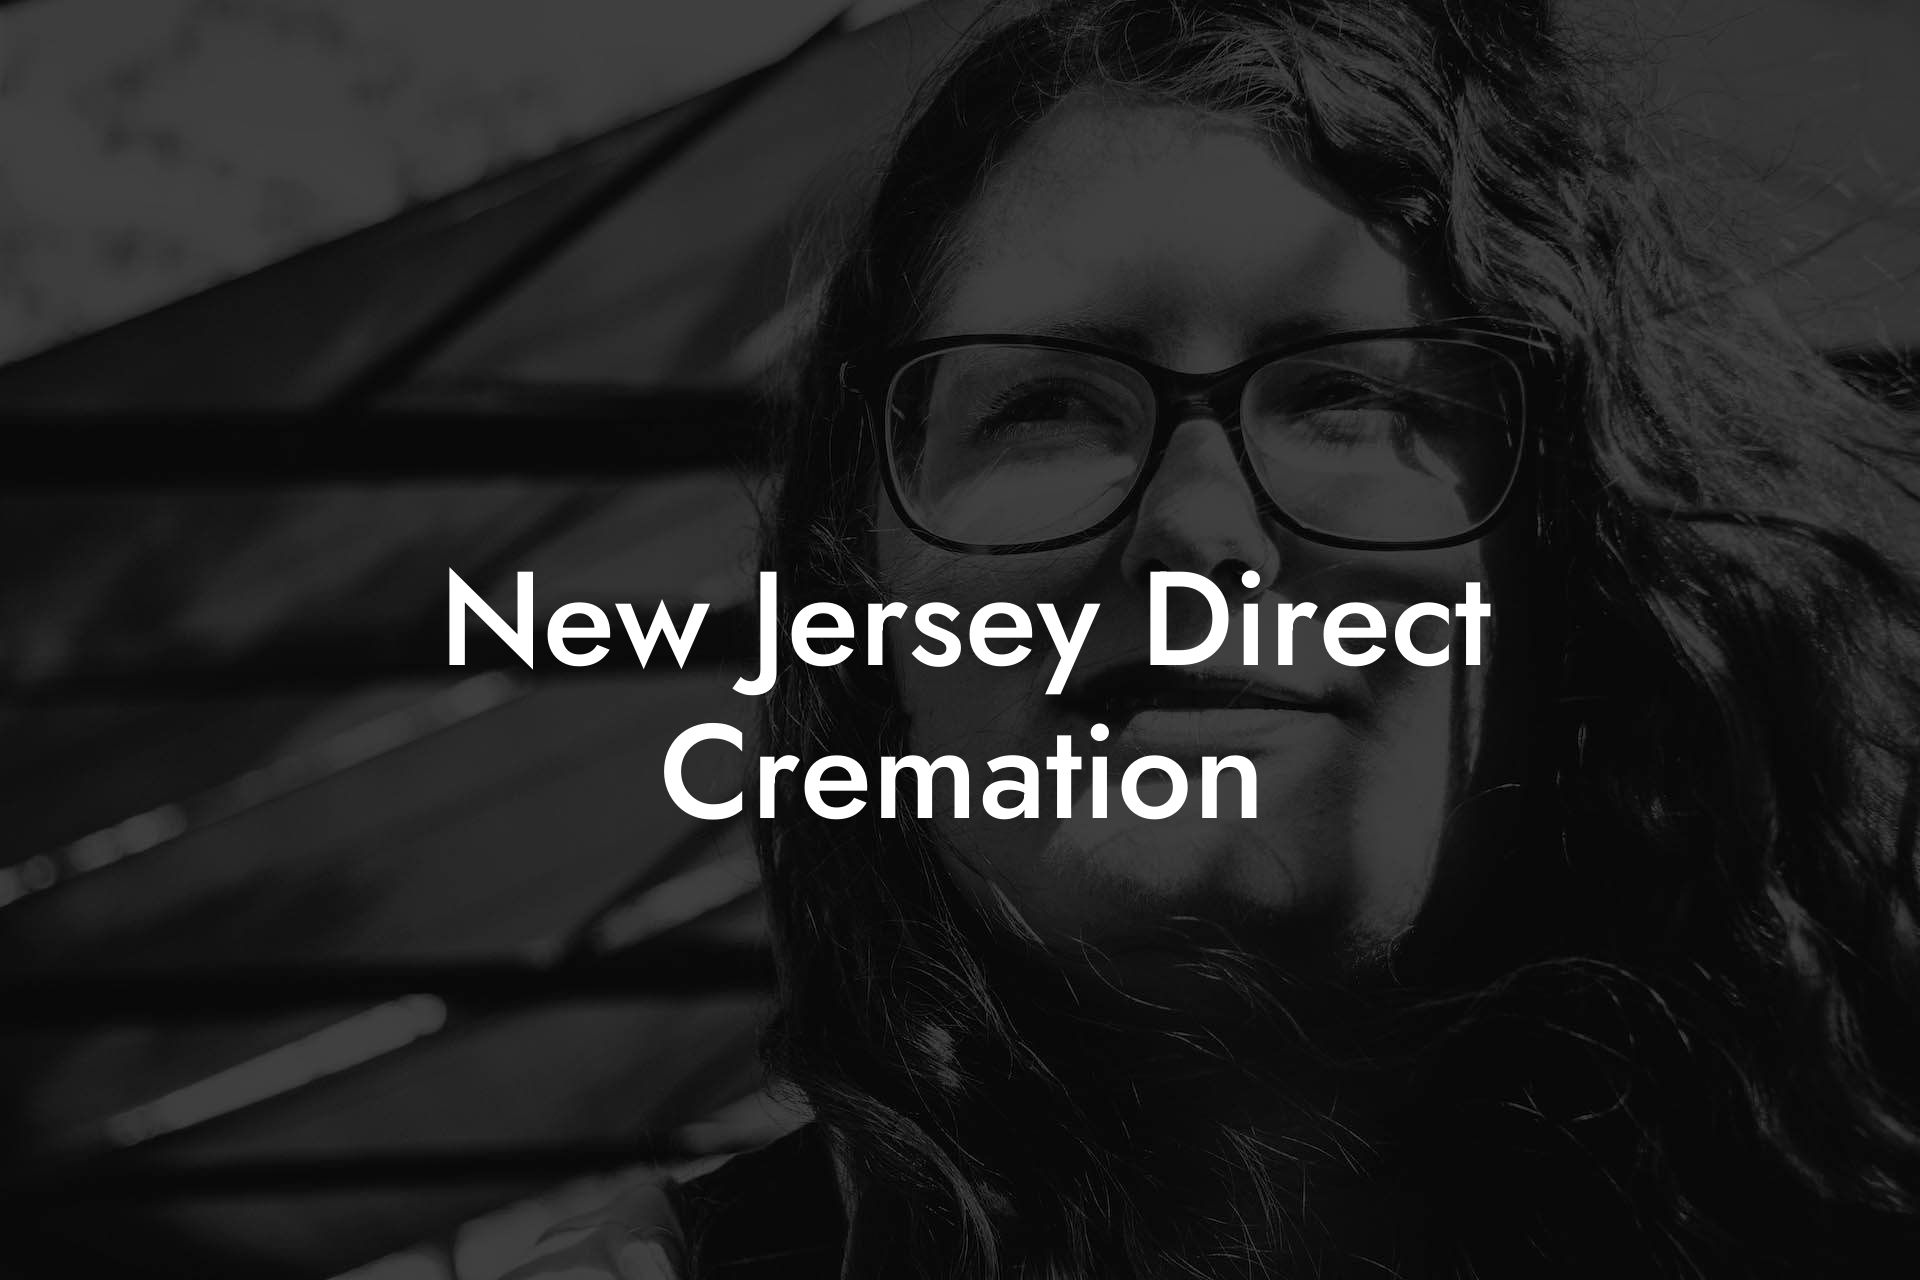 New Jersey Direct Cremation